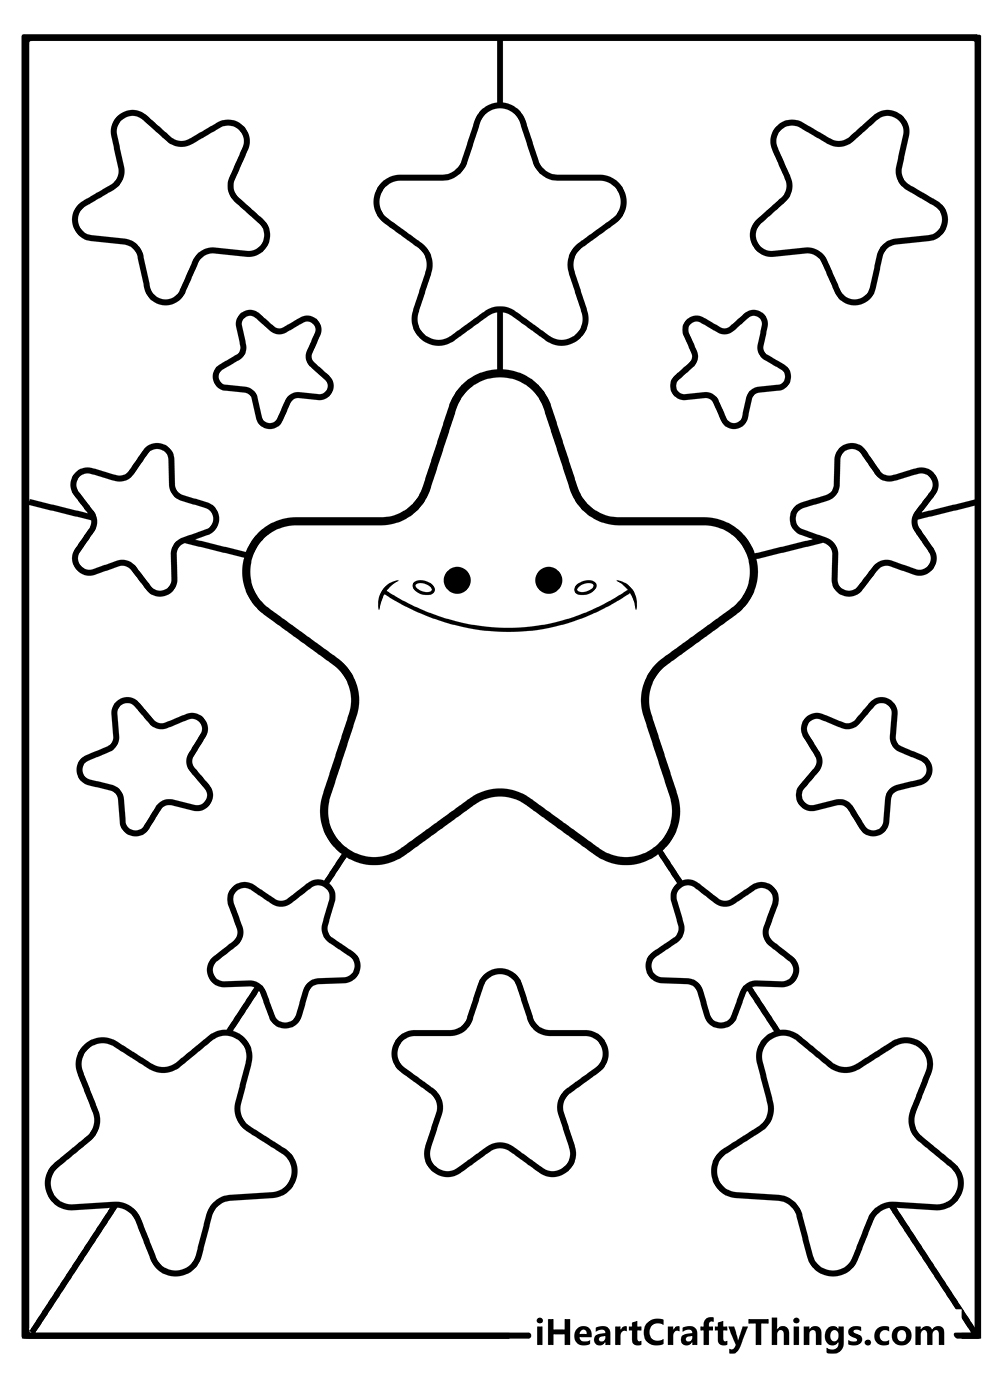 Star Coloring Pages free printable for toddlers